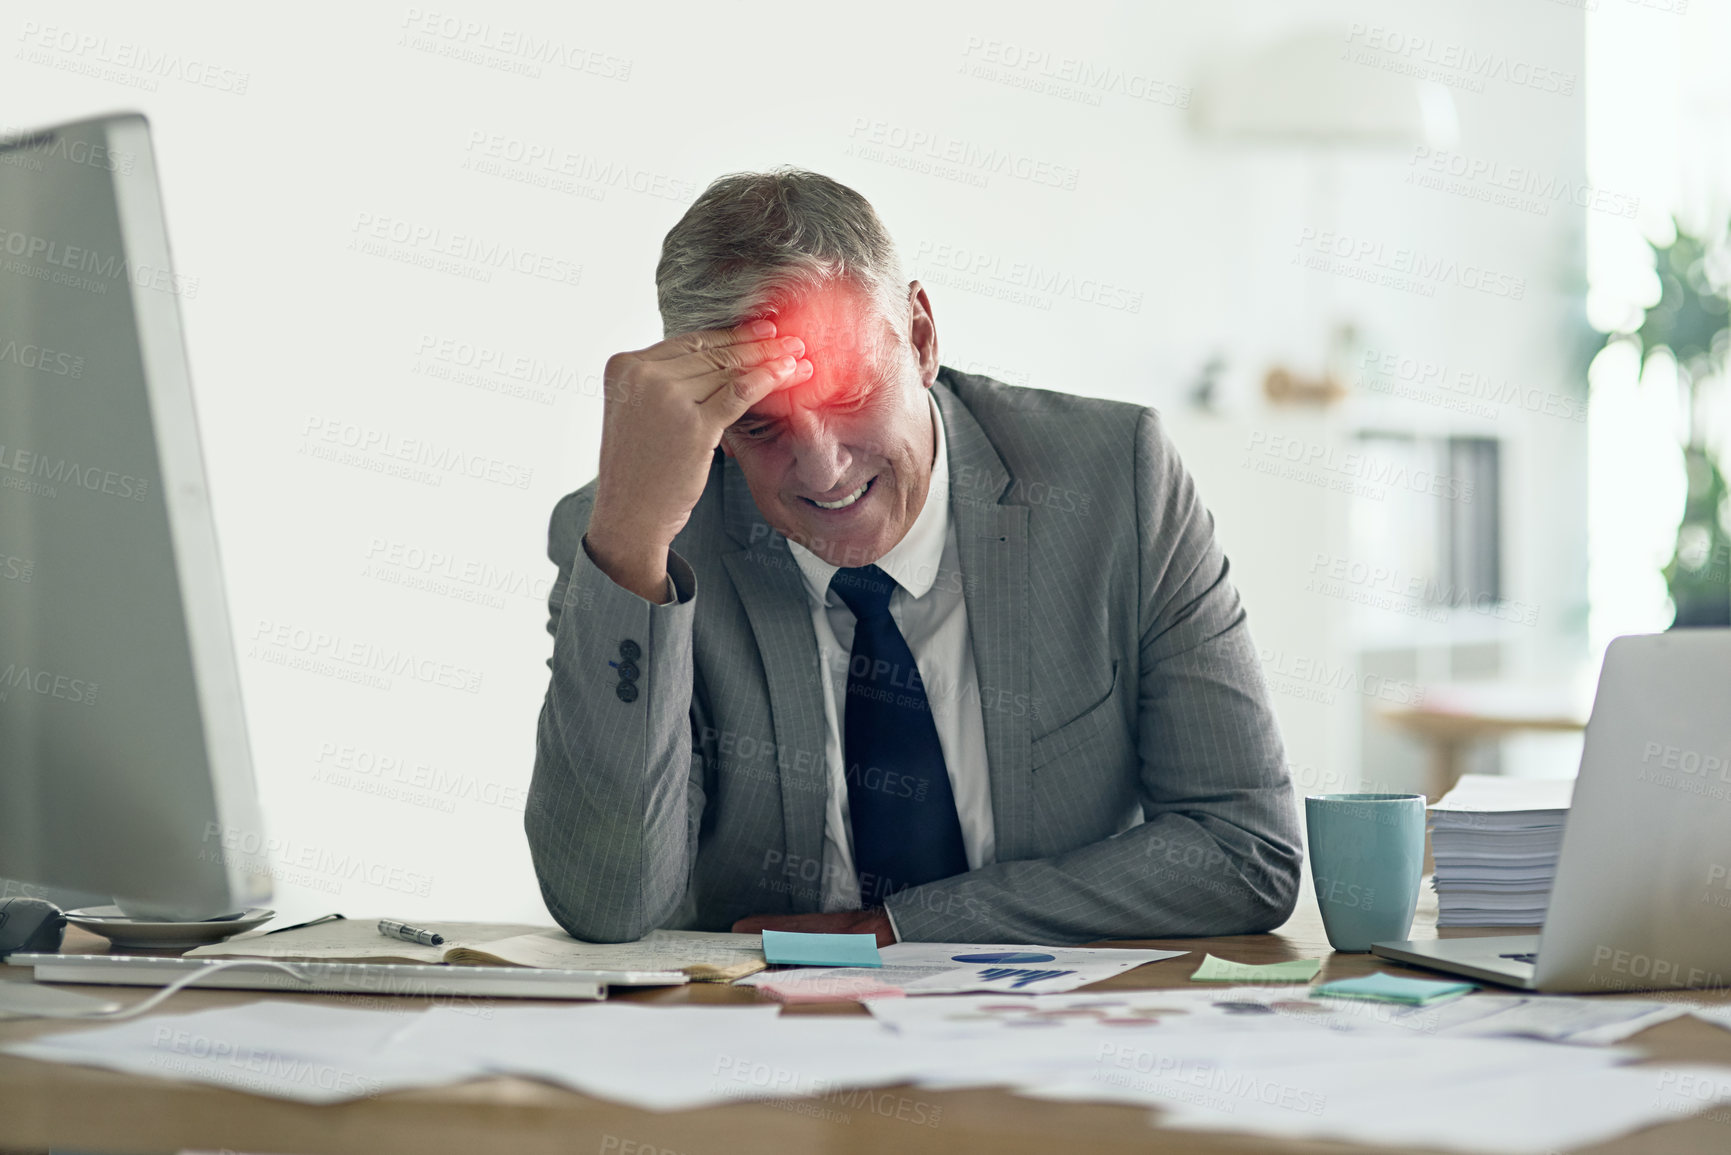 Buy stock photo Shot of a businessman with a headache holding his head while sitting at his desk